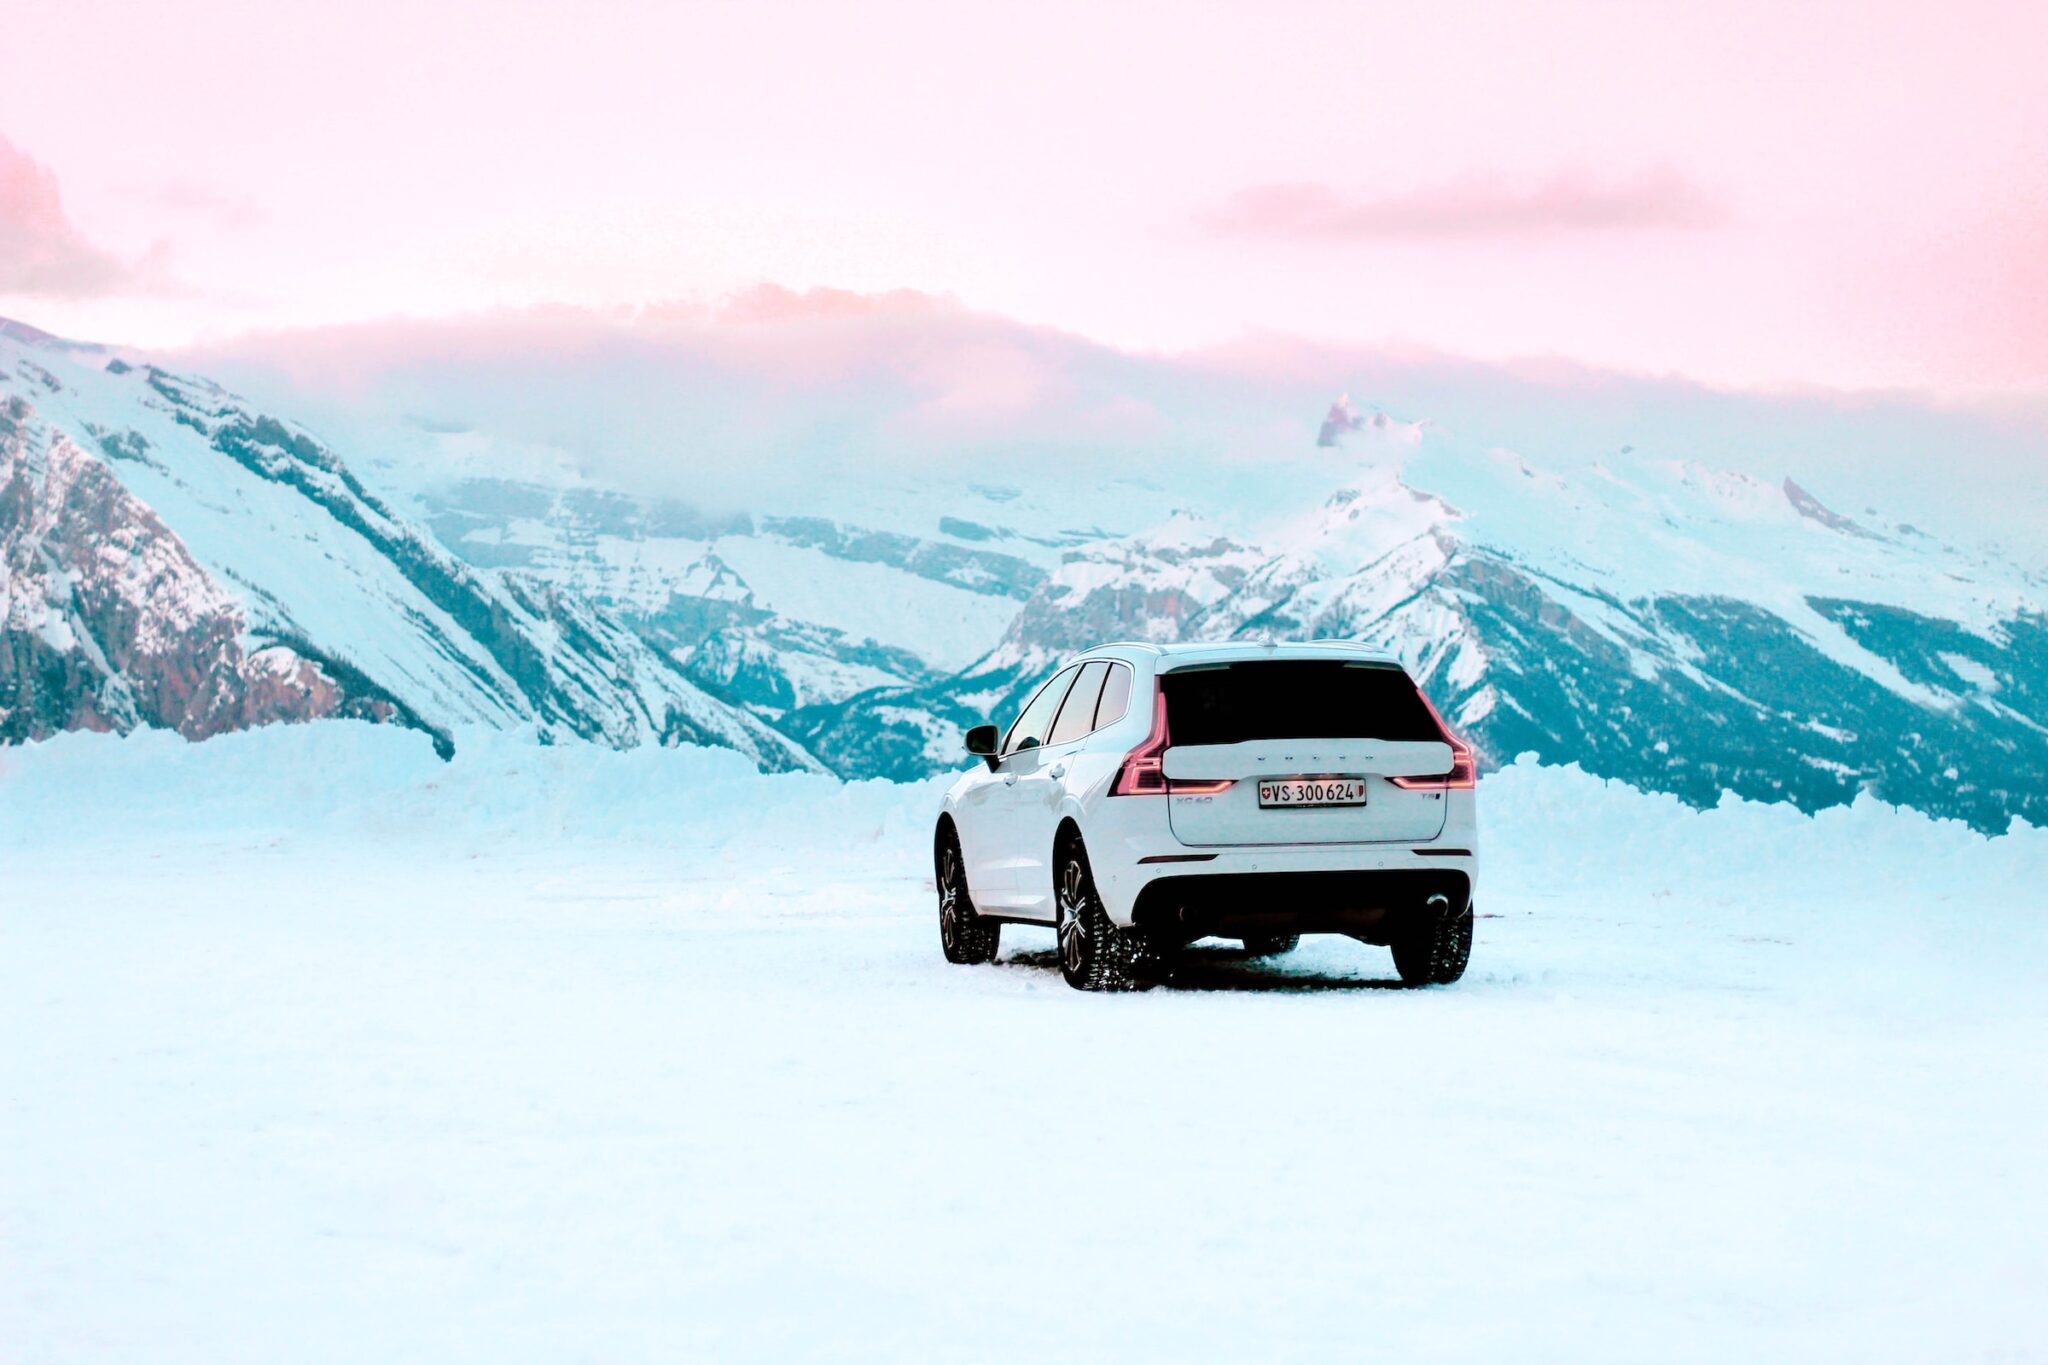 Choosing the Right Snow Tires